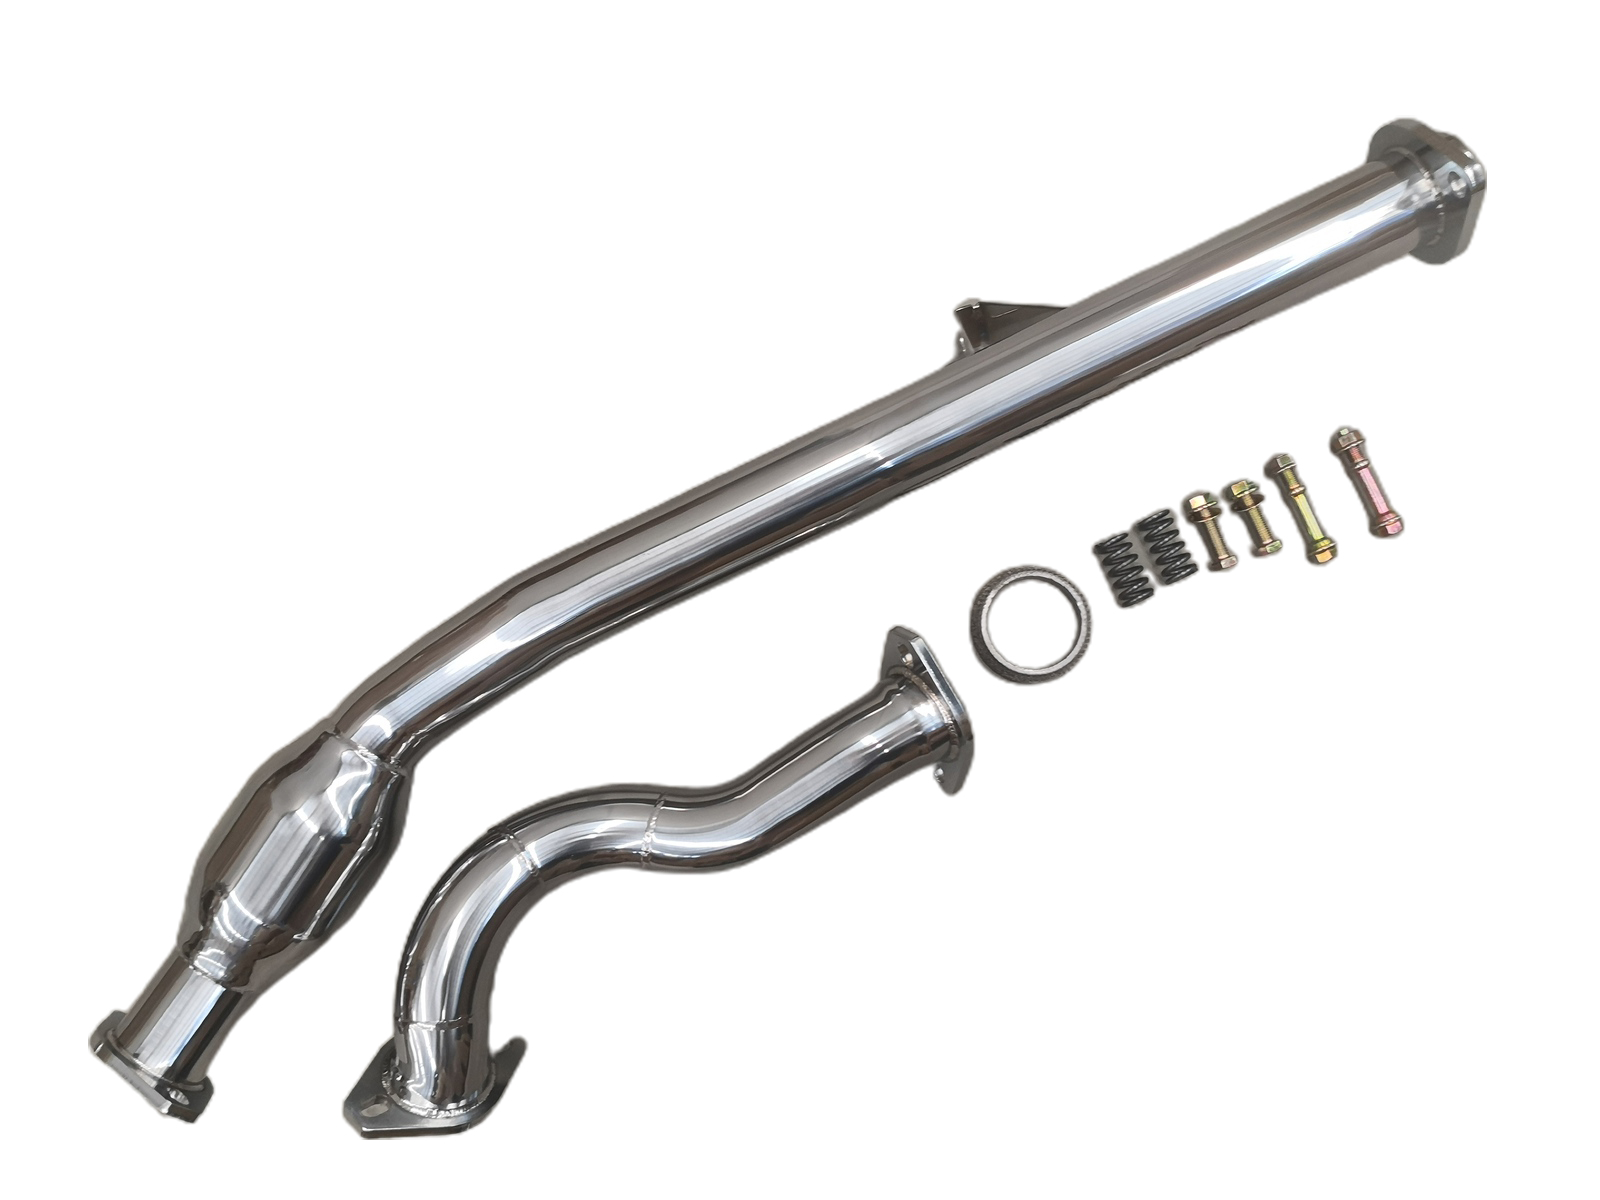 https://www.ultrex.com.au/assets/images/subaru-brz-toyota-86-exhaust-over-pipe-front-pipe-anti-drone-resonator.jpg